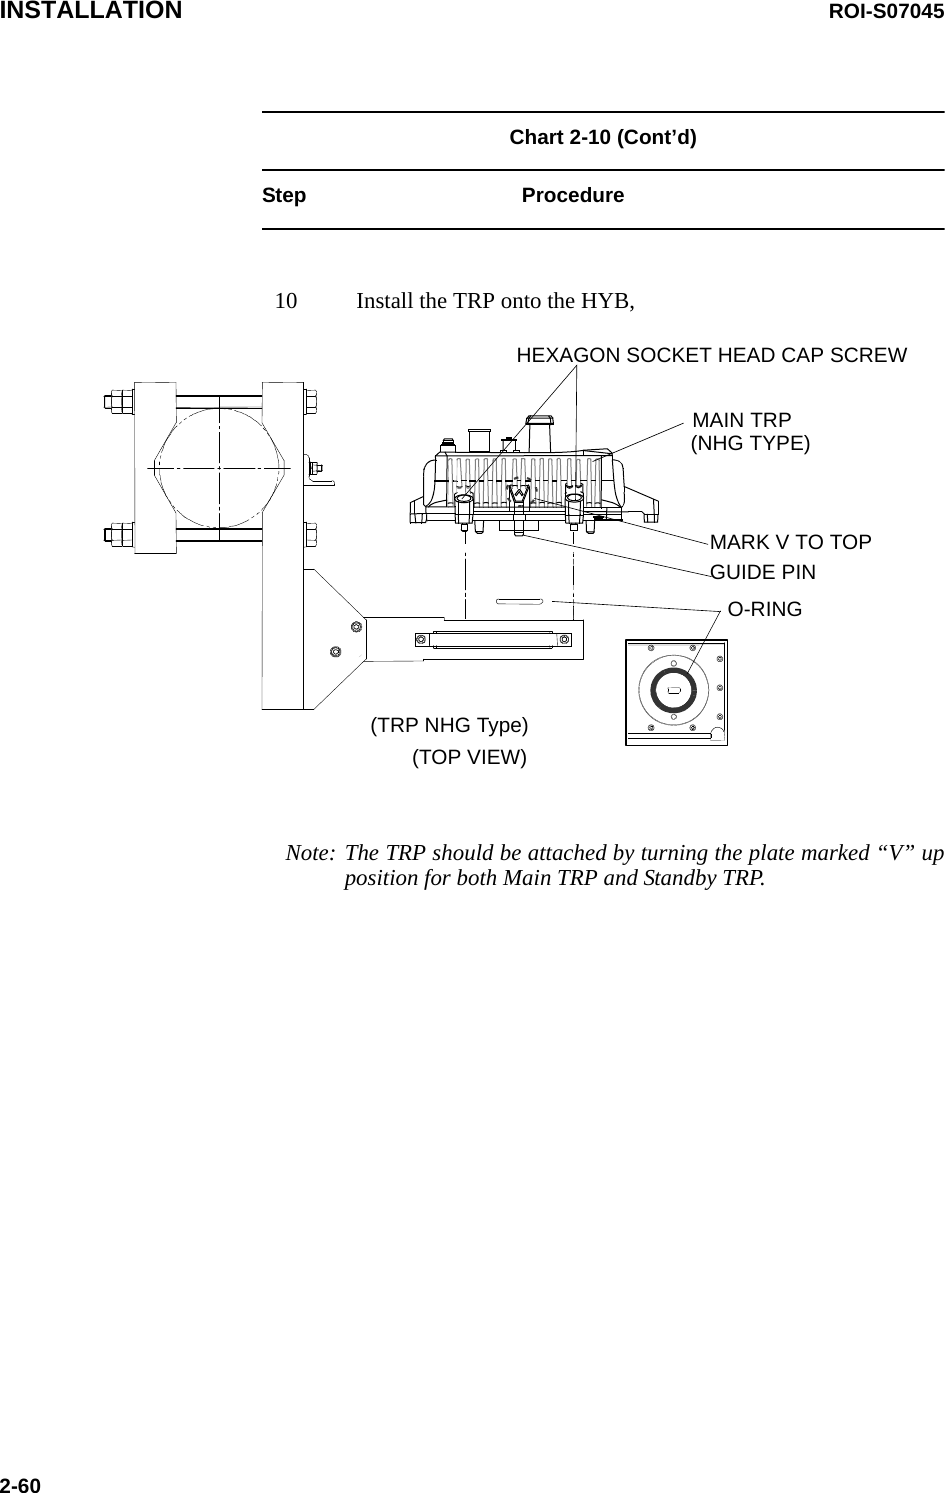 INSTALLATION ROI-S070452-60Chart 2-10 (Cont’d)Step Procedure10 Install the TRP onto the HYB,Note: The TRP should be attached by turning the plate marked “V” upposition for both Main TRP and Standby TRP. HEXAGON SOCKET HEAD CAP SCREWMAIN TRPO-RING  GUIDE PINMARK V TO TOP(TOP VIEW)(NHG TYPE)(TRP NHG Type)